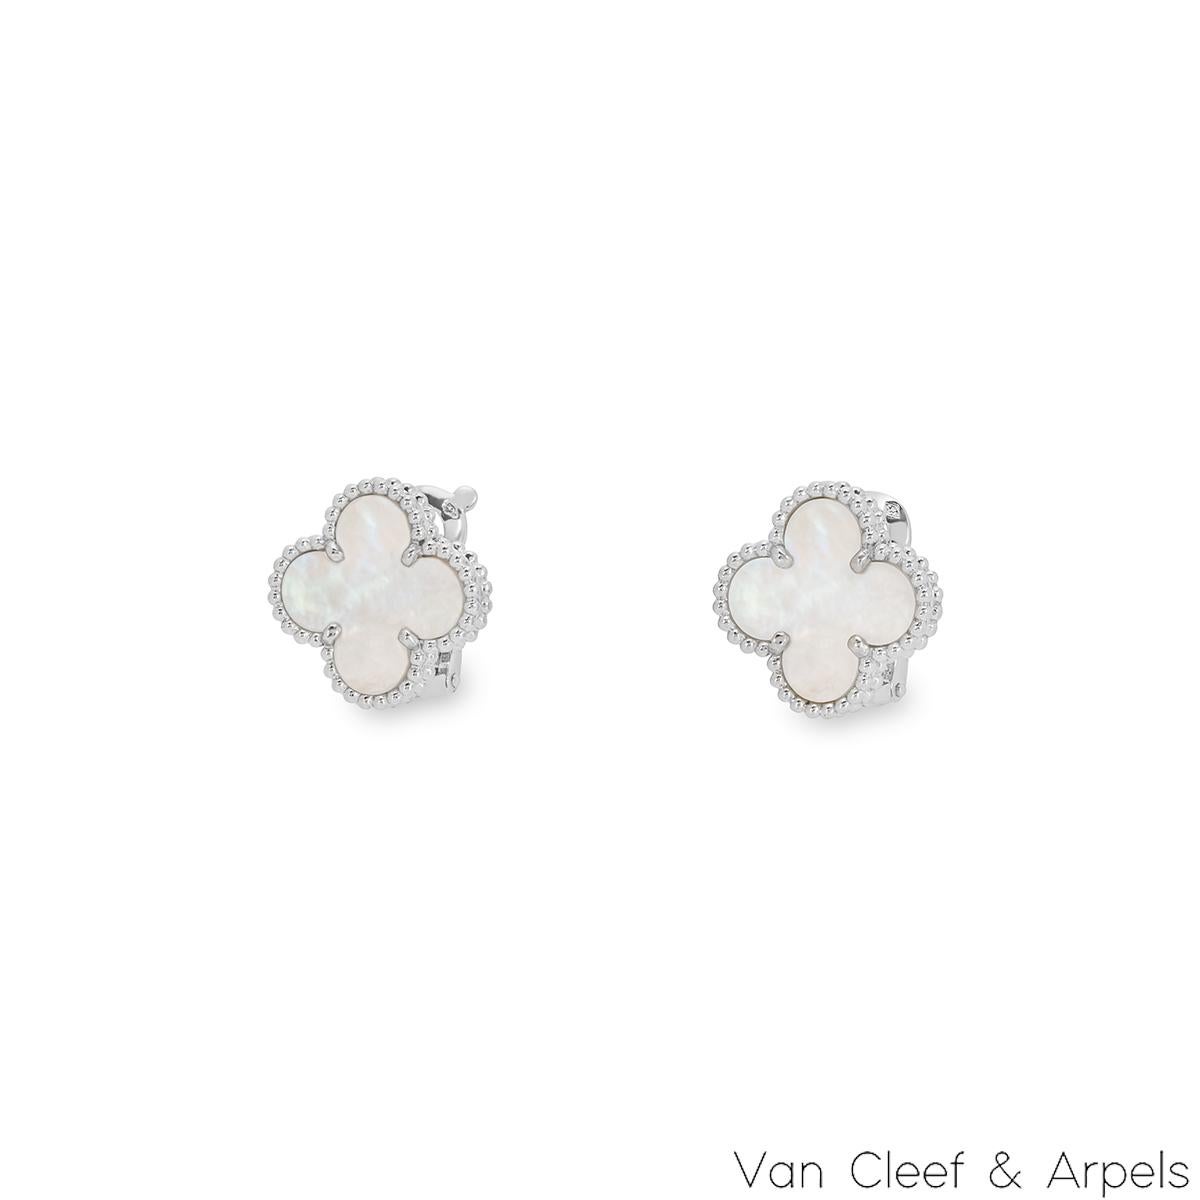 An elegant pair of 18k white gold mother of pearl Van Cleef & Arpels earrings from the Vintage Alhambra collection (VCARP48600). The earrings feature the iconic 4-leaf clover motif, with a mother of pearl inlay set to the centre, complemented by a